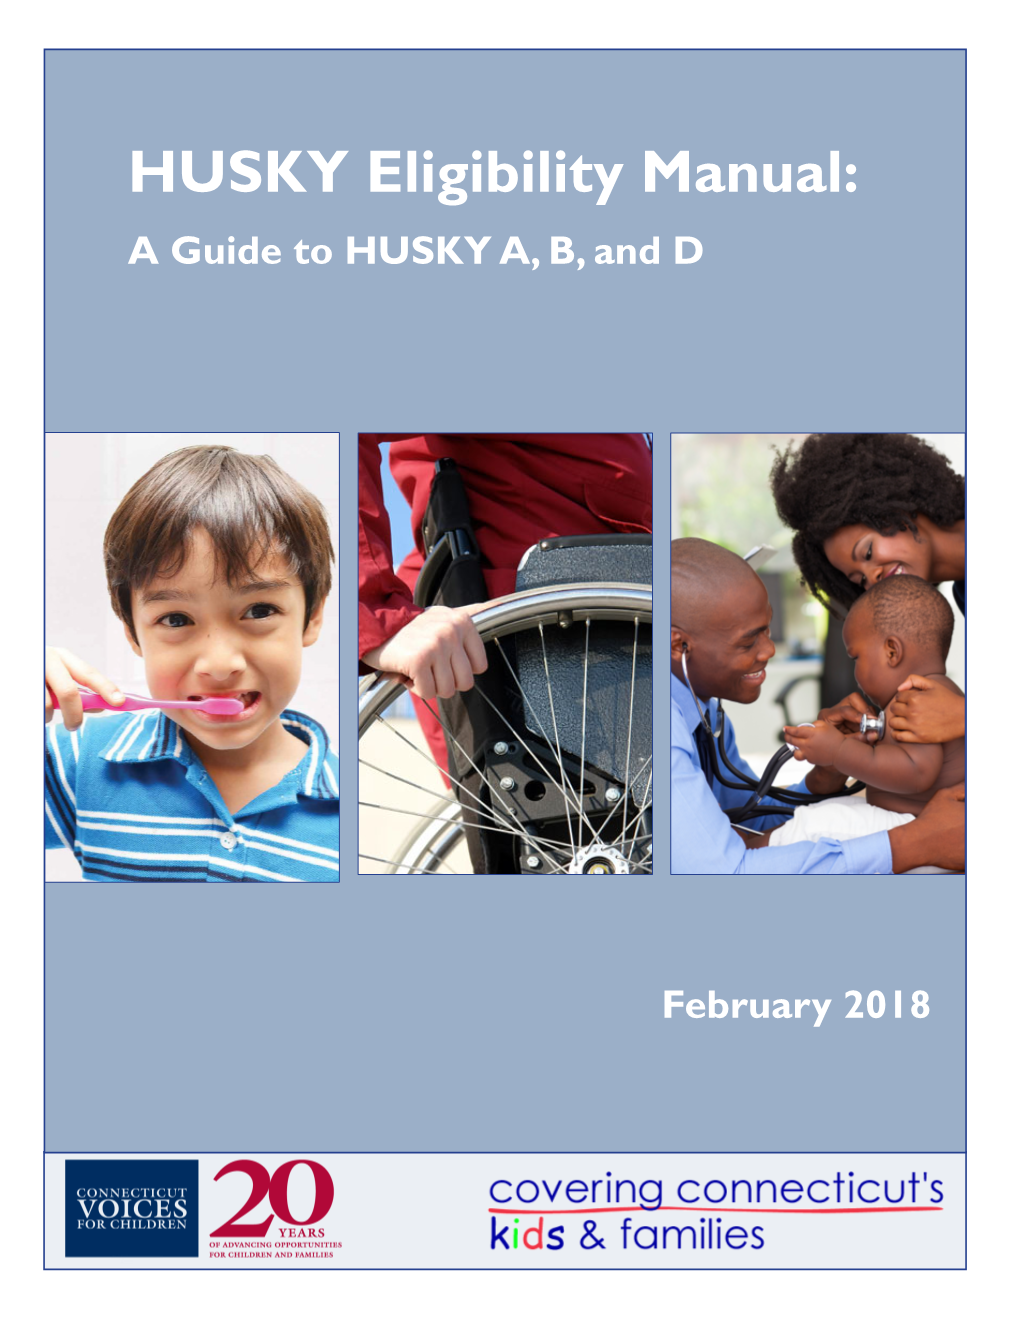 HUSKY Eligibility Manual: a Guide to HUSKY A, B, and D